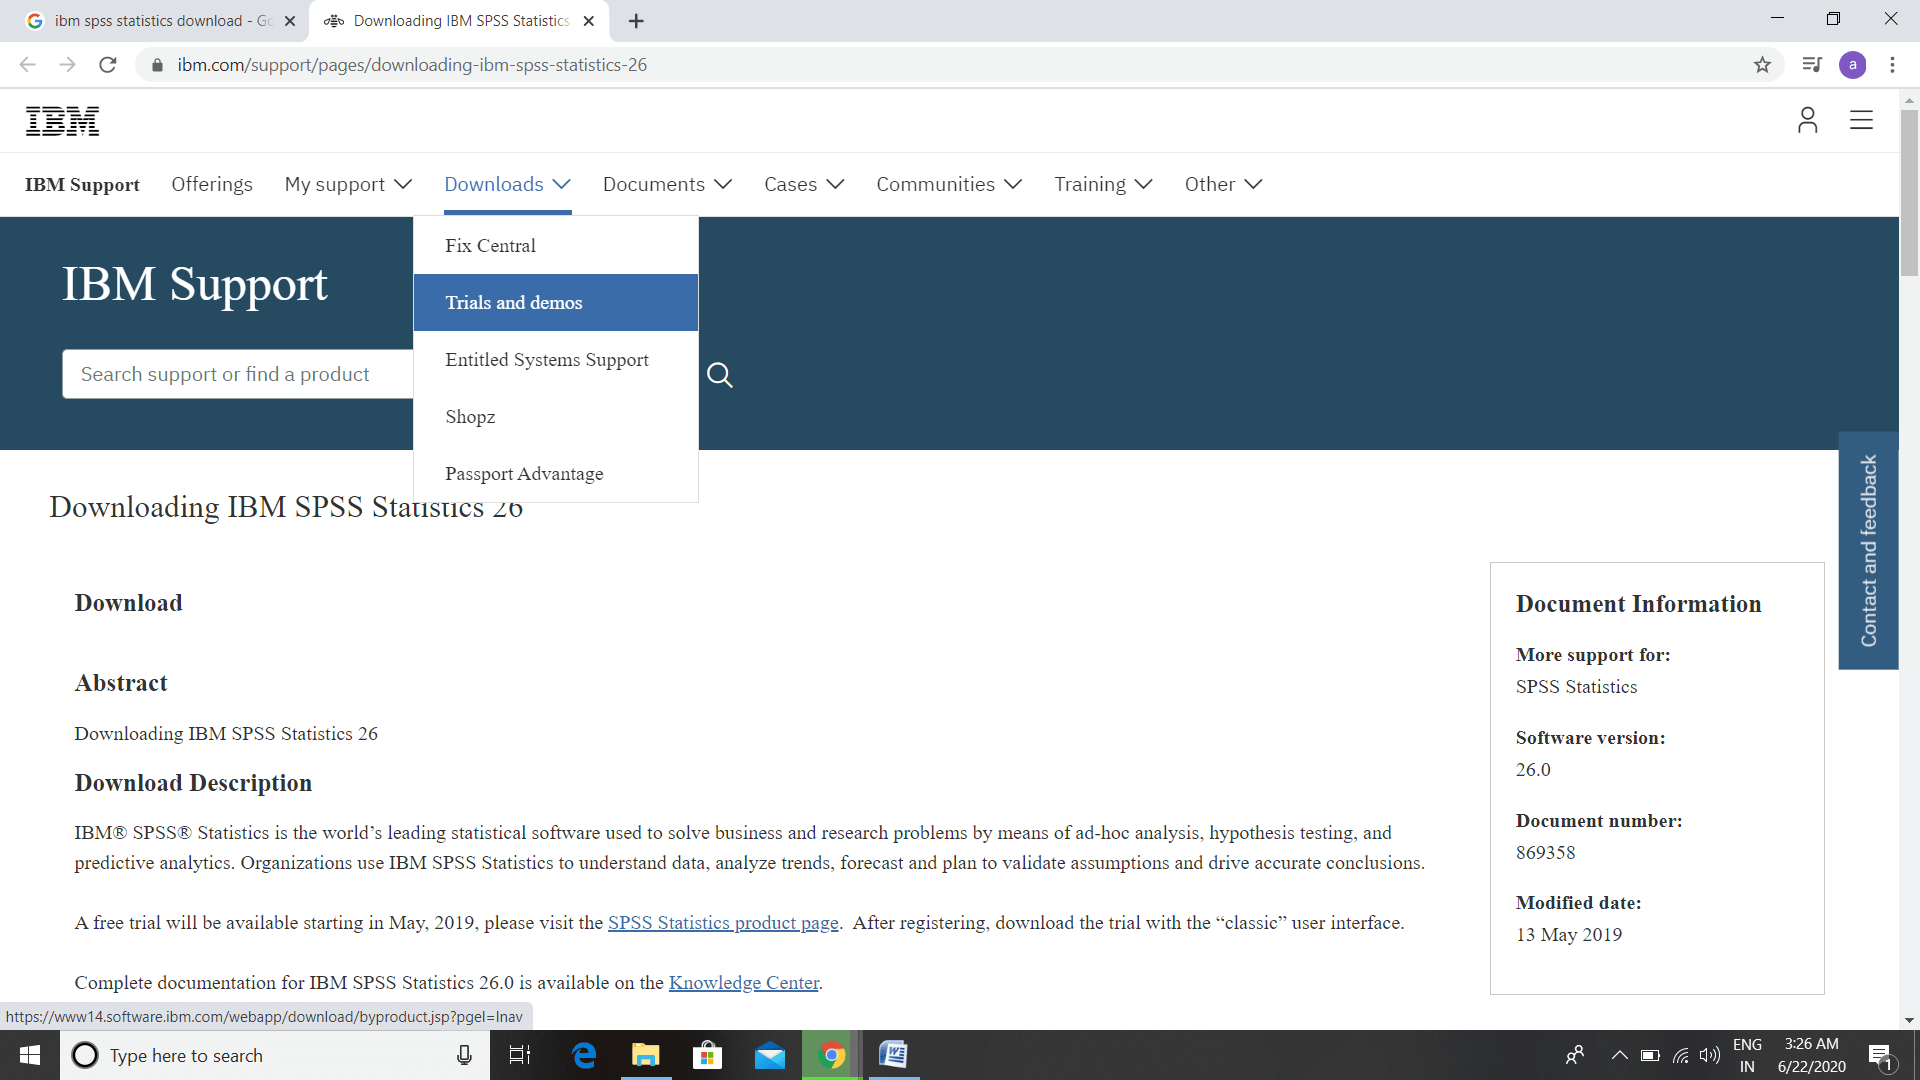 spss free trial for windows 10 isnt loading